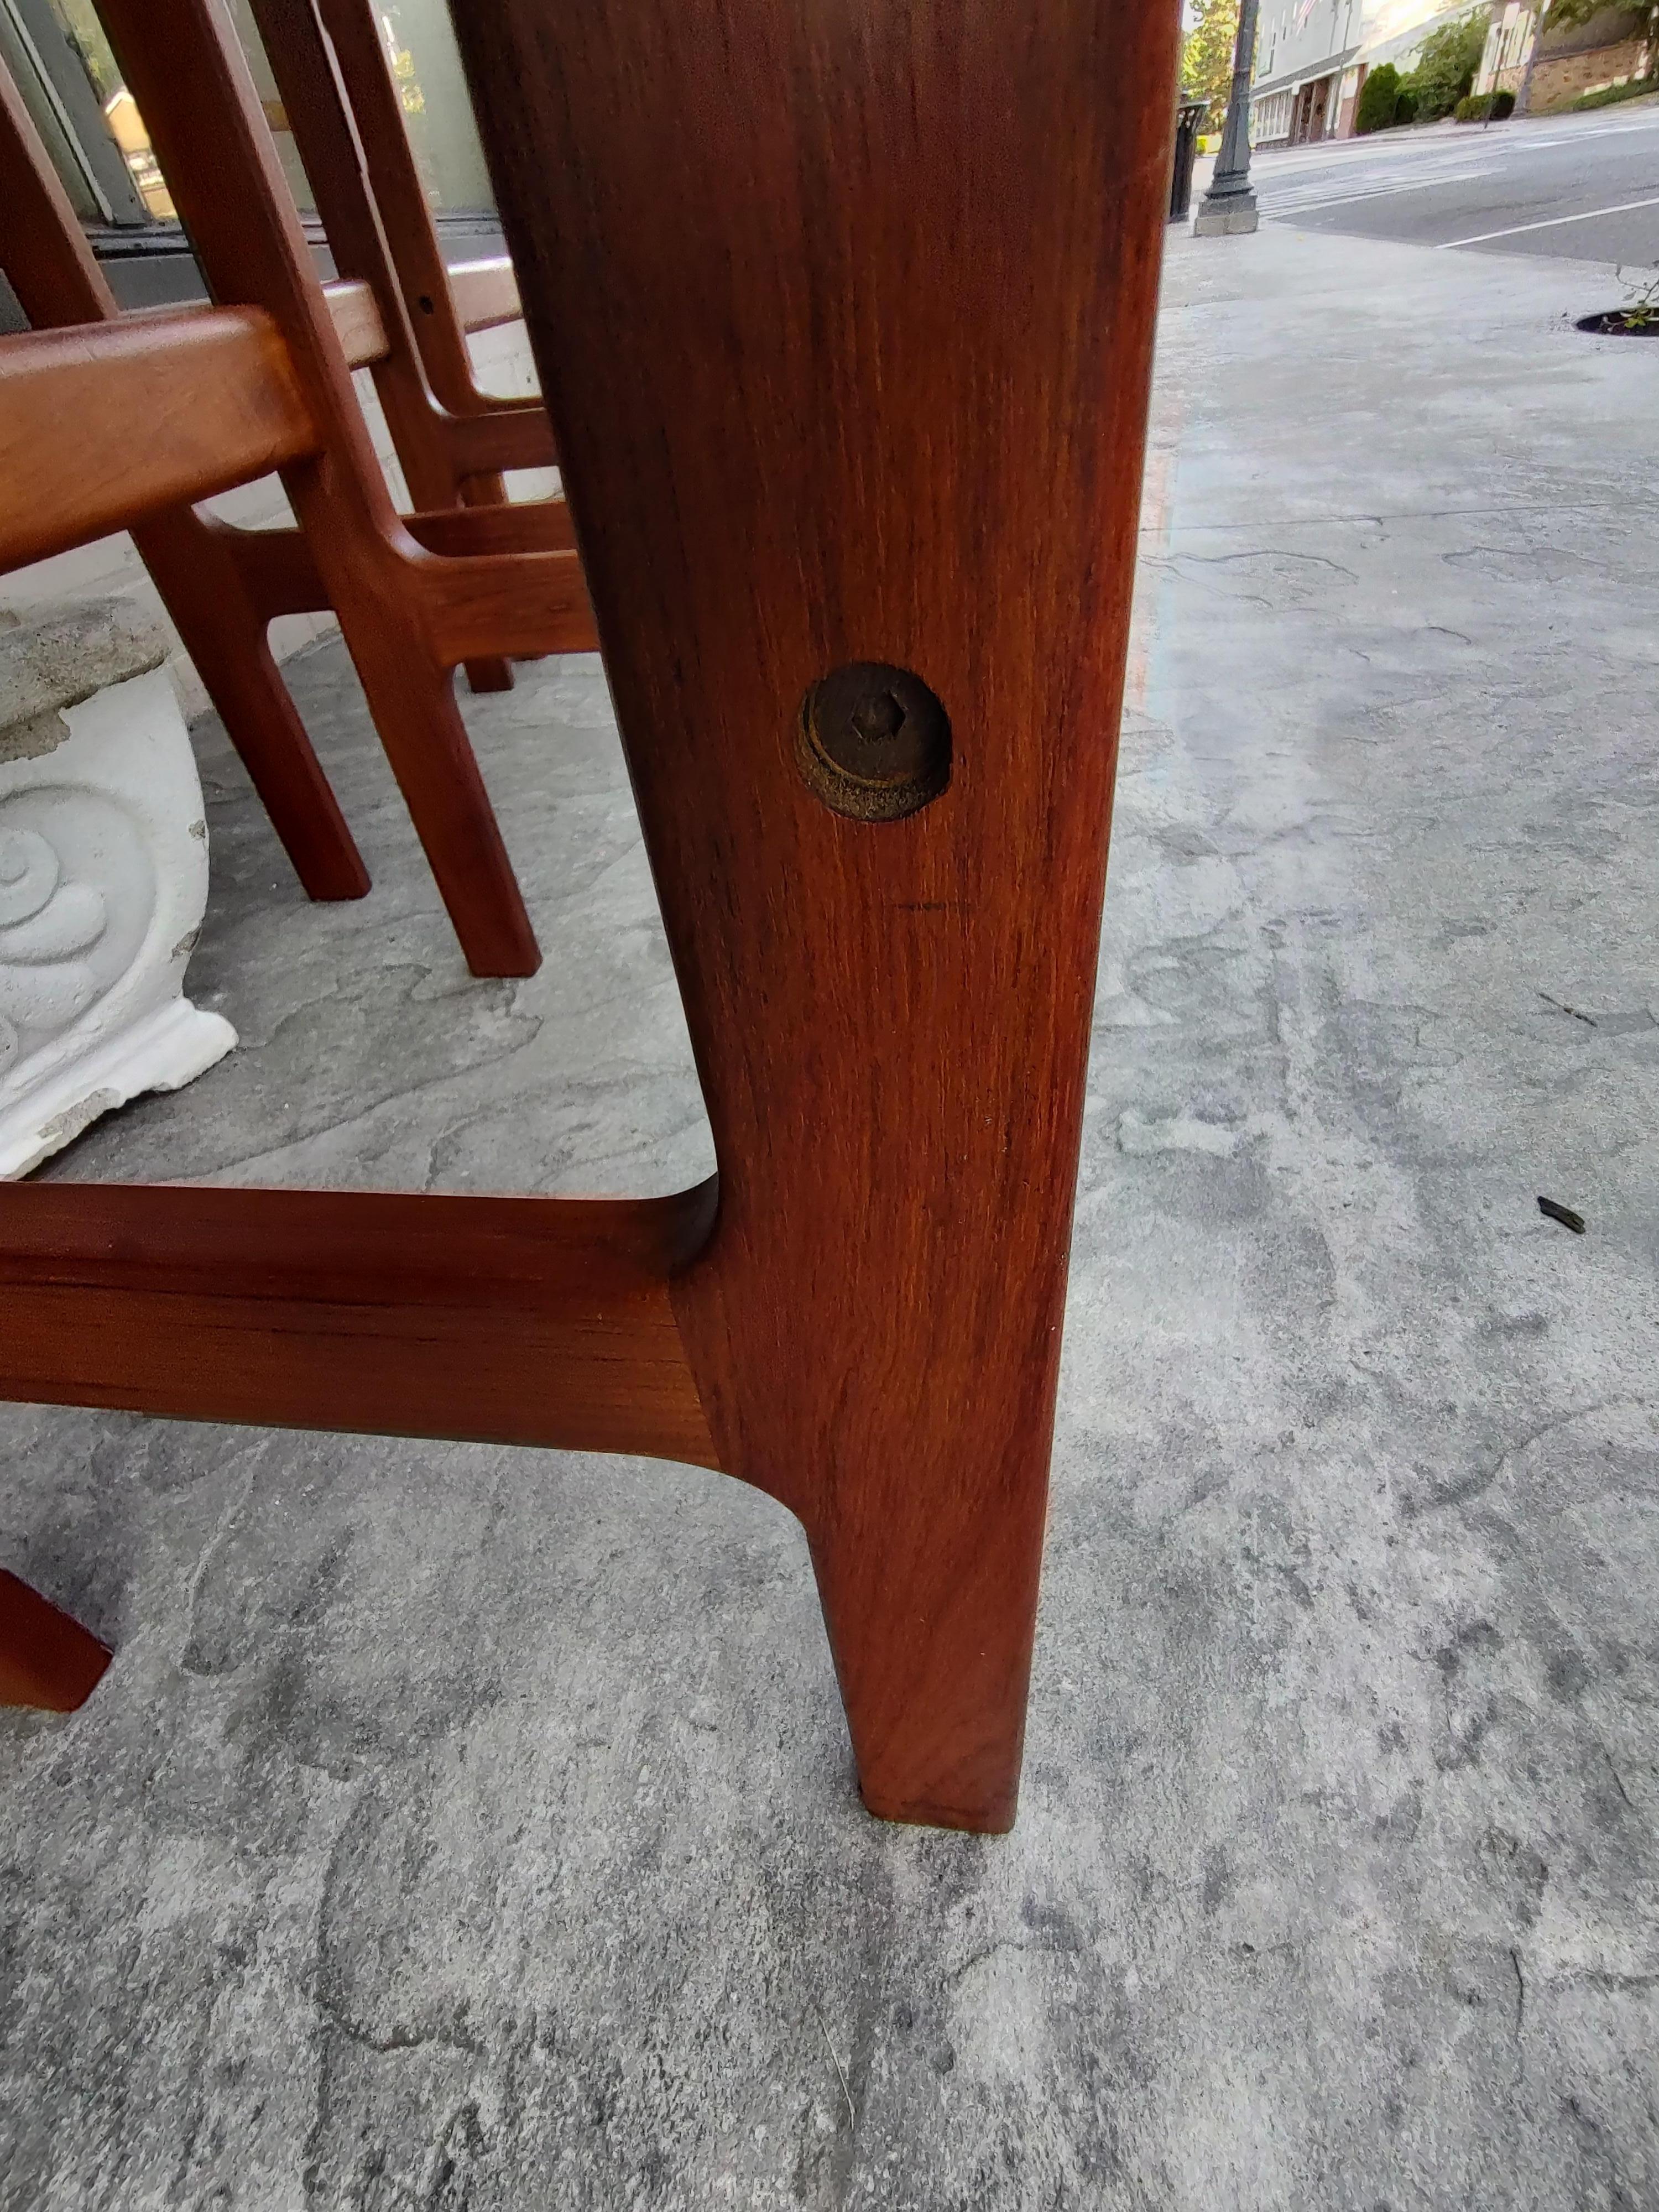 Fabulous set of 4 teak bar stools with arms and a back. Fabric is lightly soiled but in good condition. Frames are excellent. Sold and priced individually. Signed d- scan on underside of the seat.